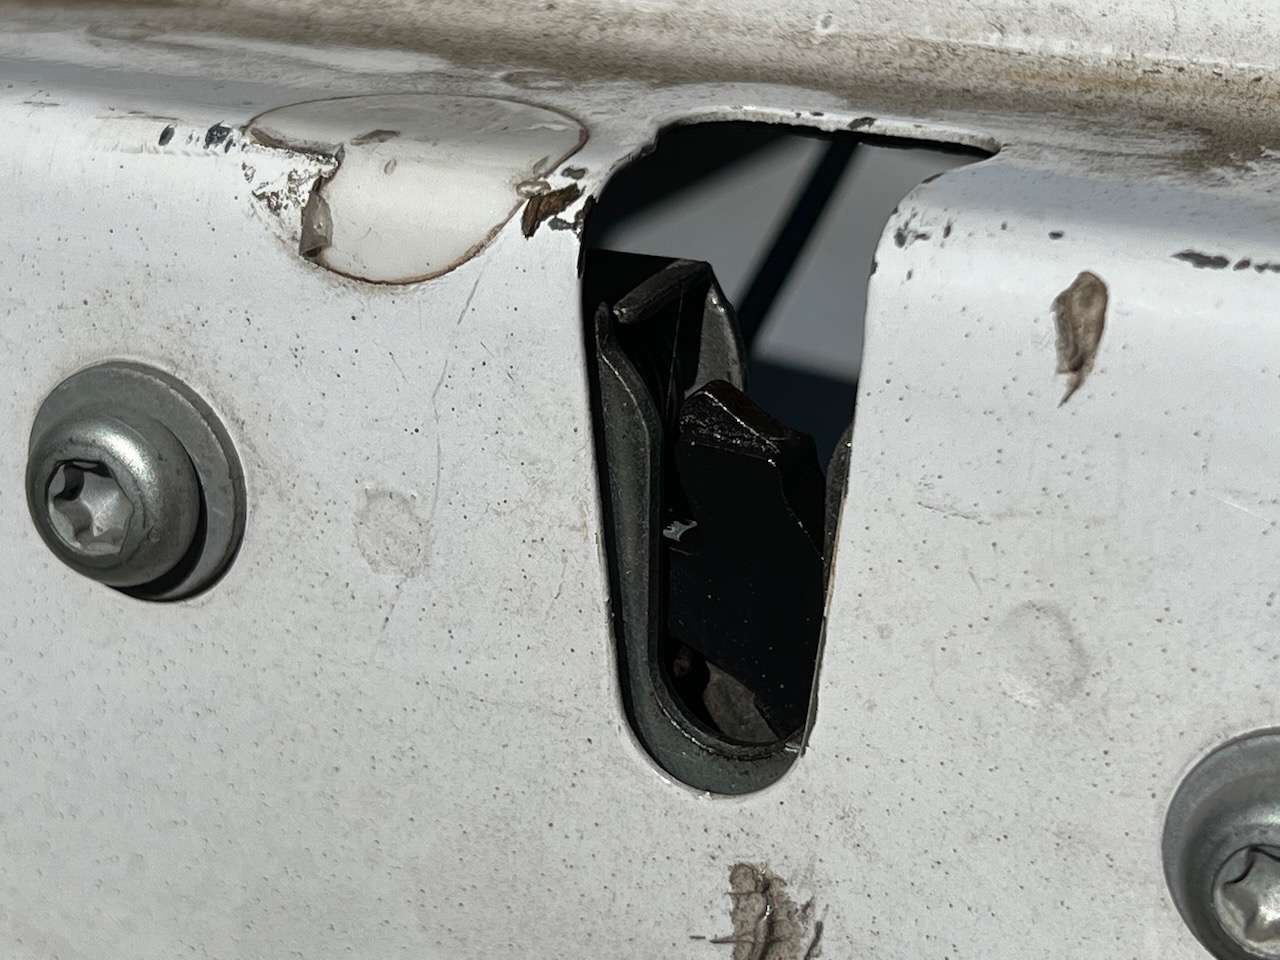 Locking end latches on tailgate that engage the permanent stud on the truck to secure the tailgate. These need to be lubricated.